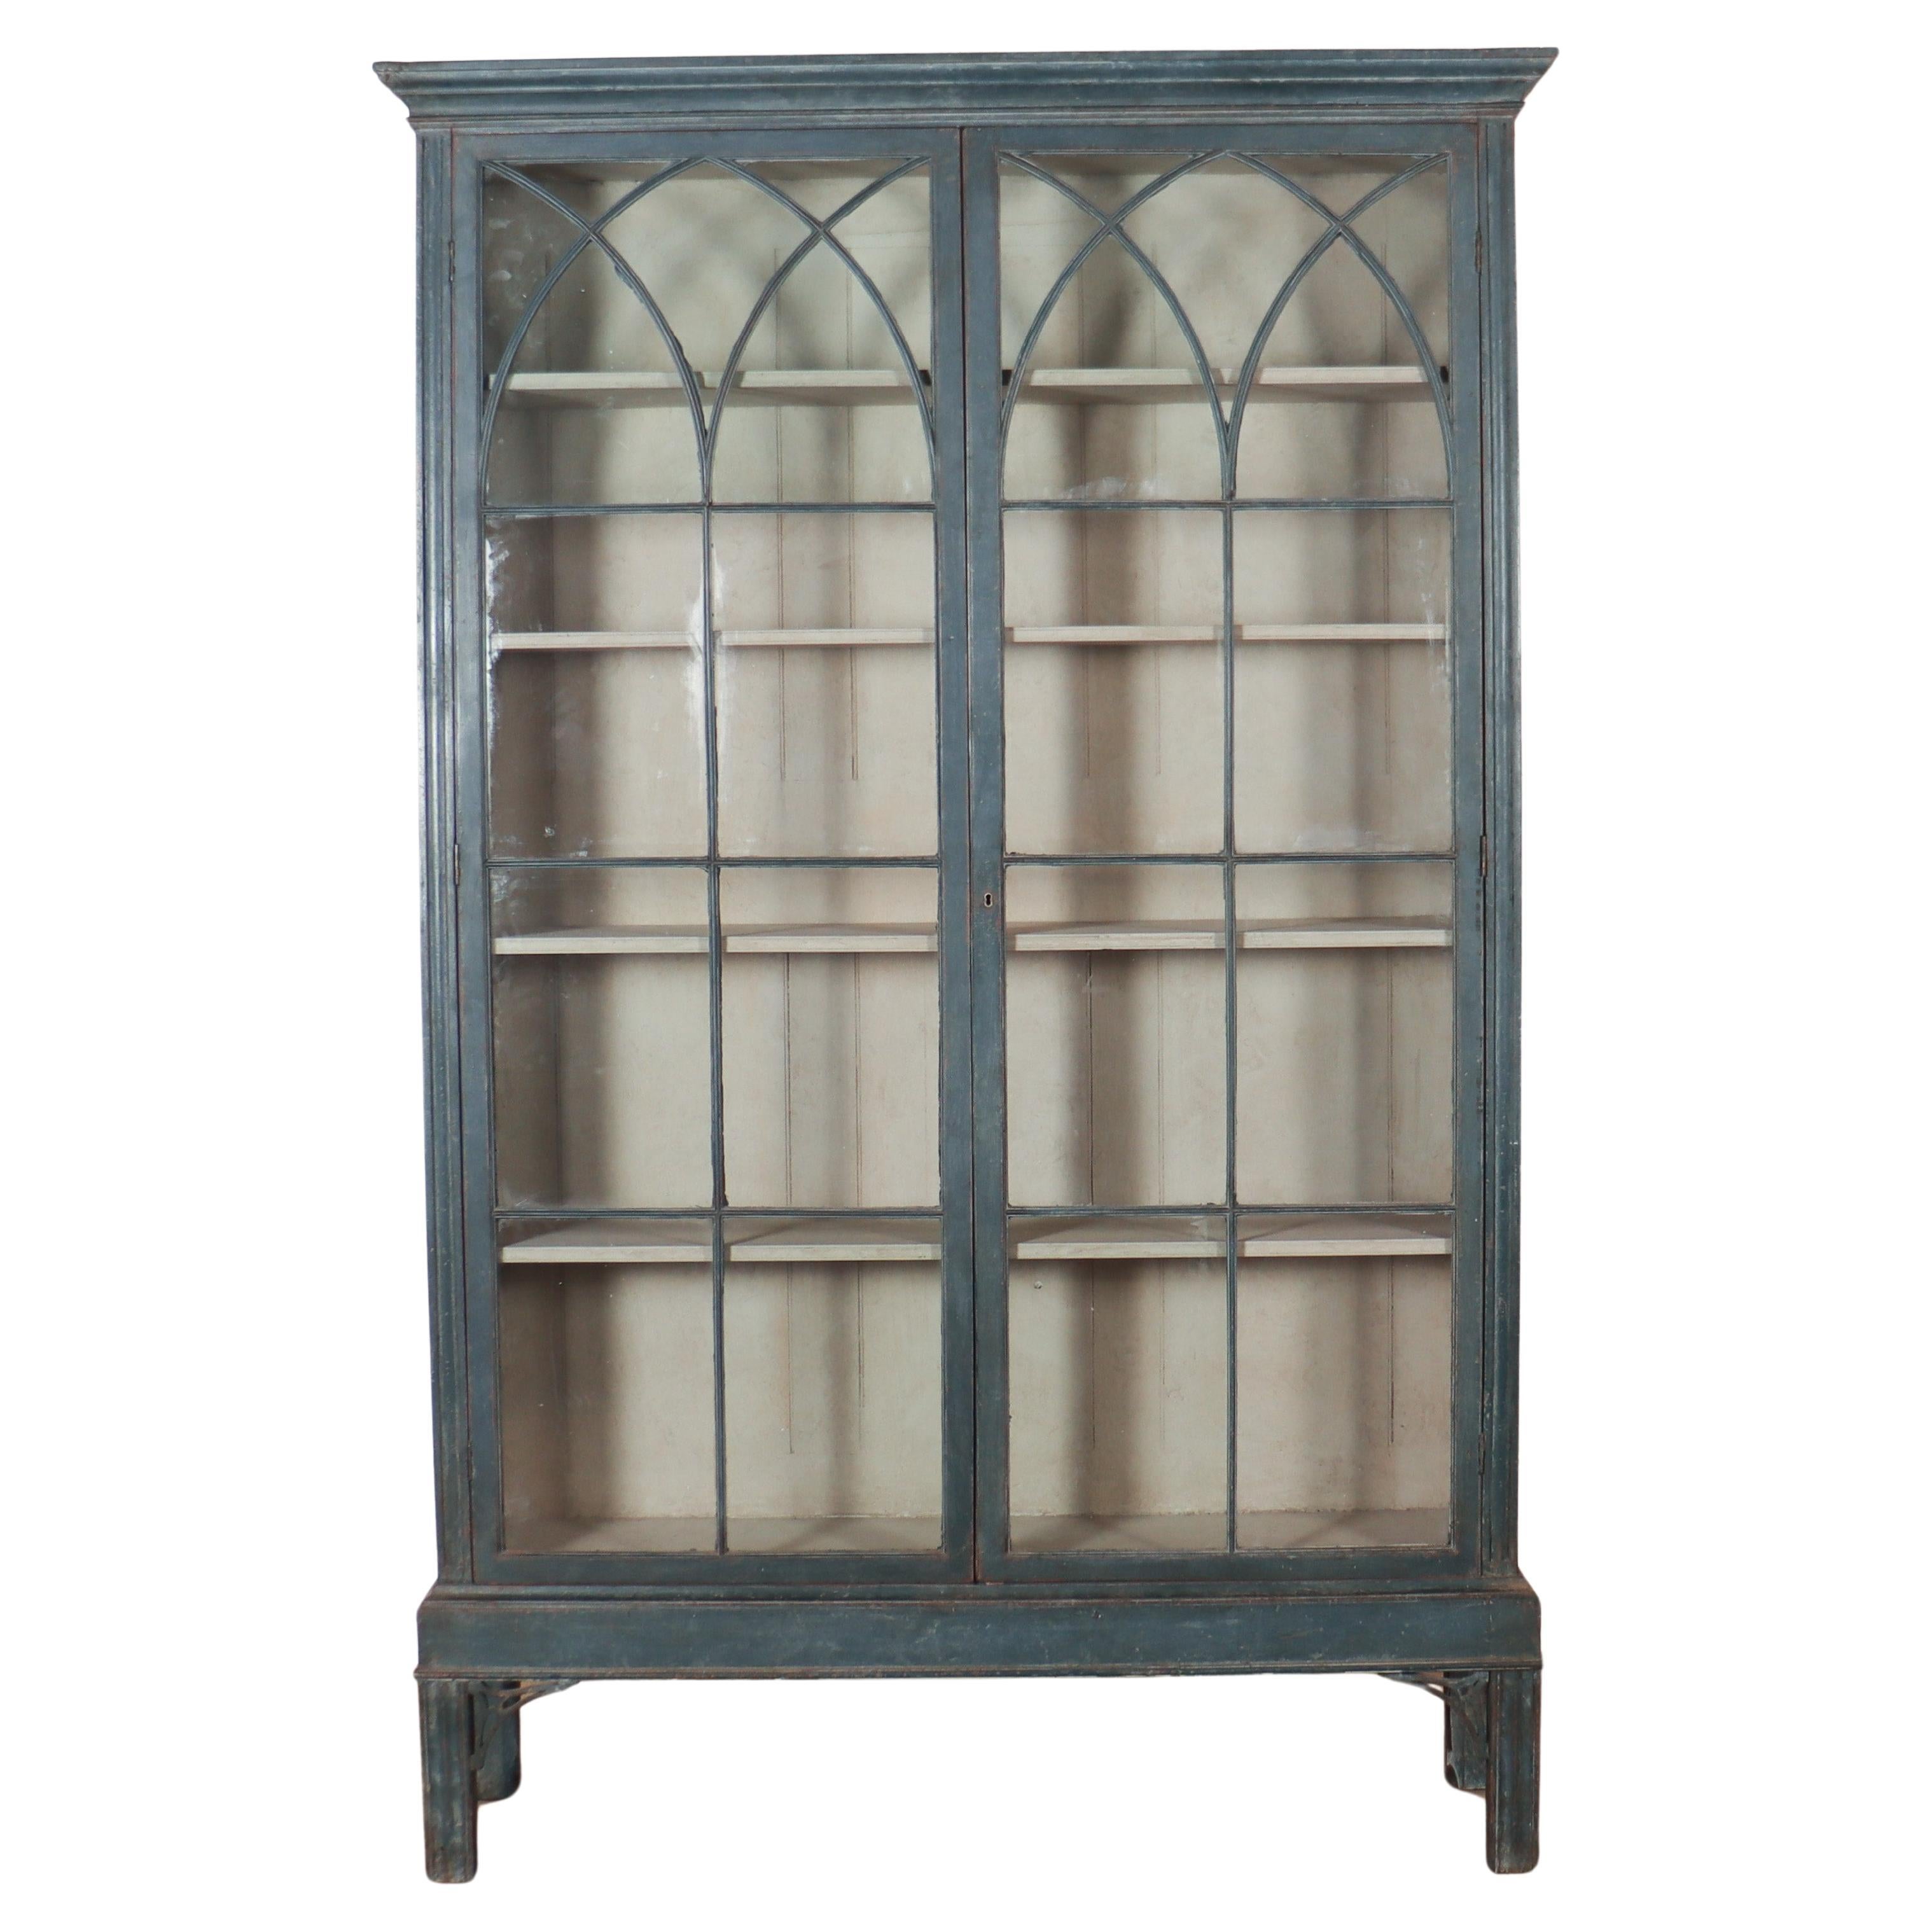 English Painted Display Cabinet